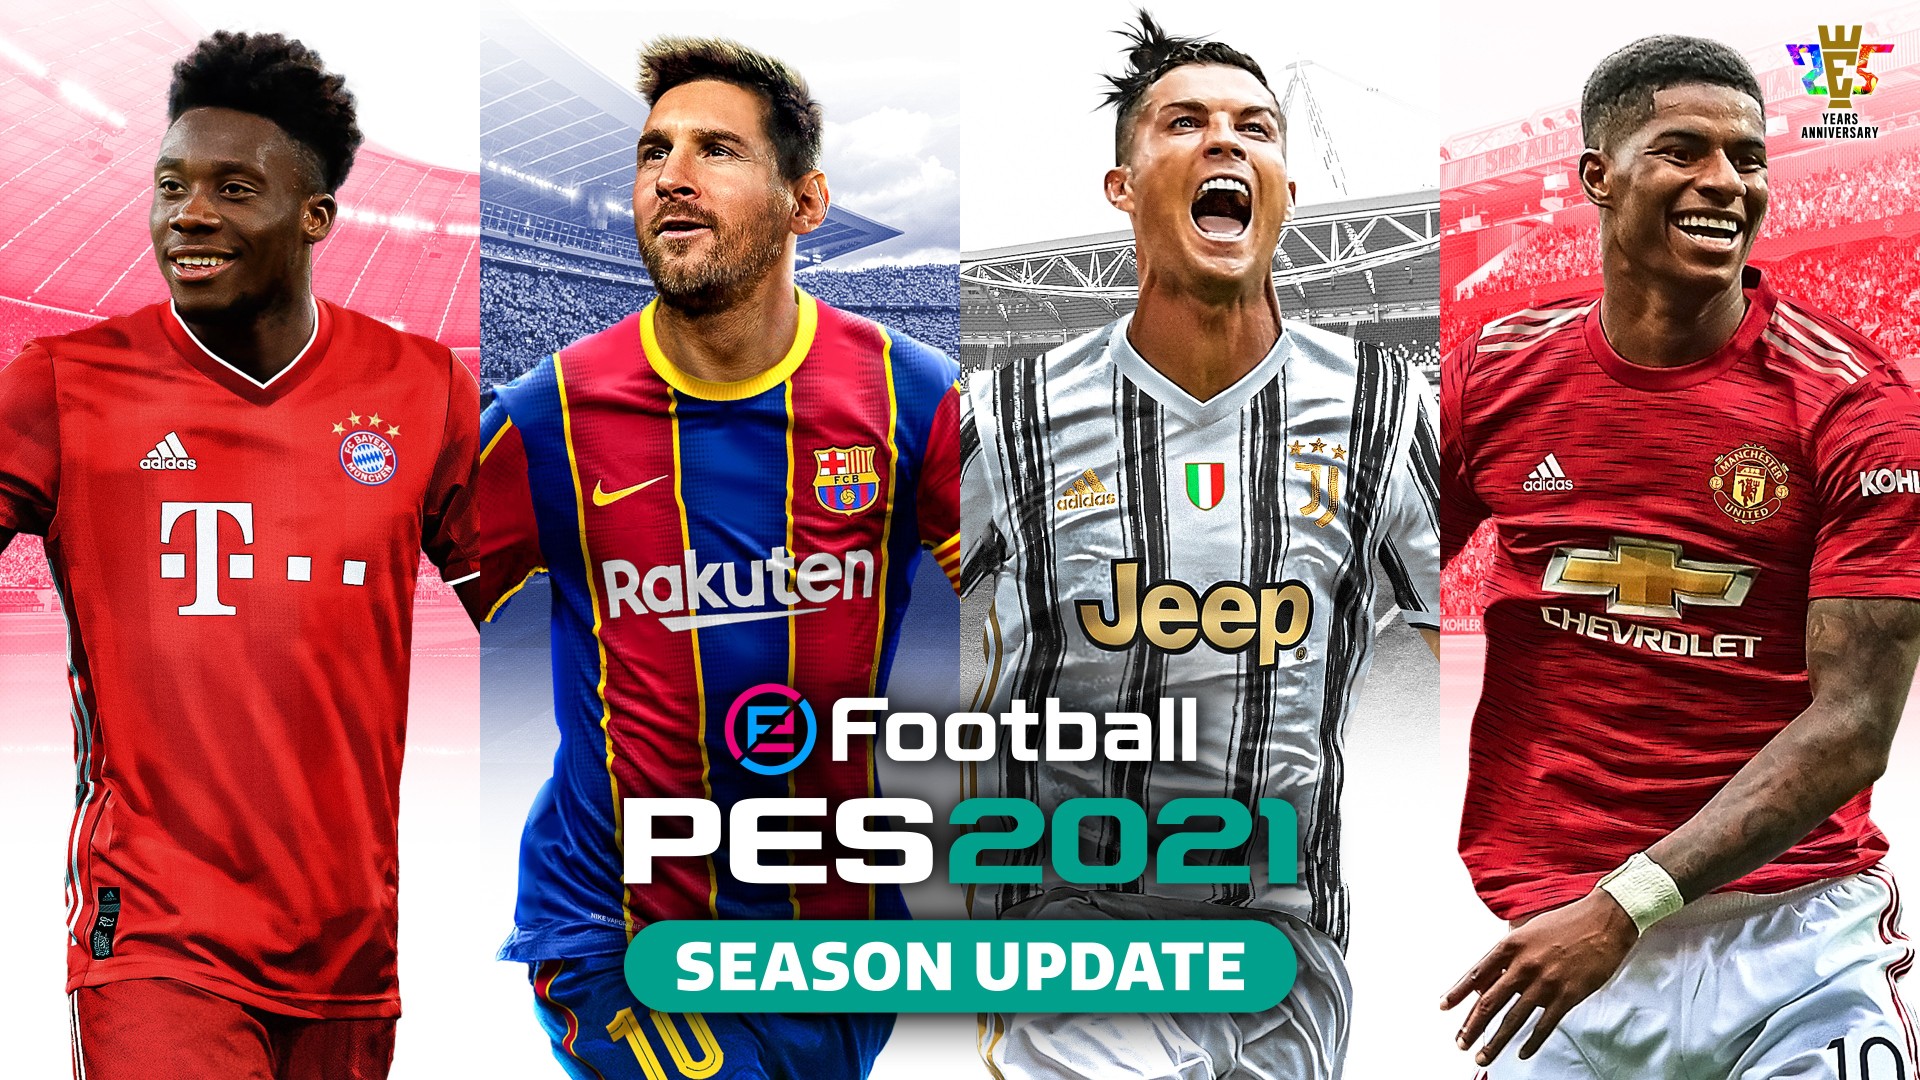 second hand Damp Chewing gum Soccer Icons Messi and Ronaldo Make History in the 25th Year Anniversary of  the PES Franchise - Xbox Wire